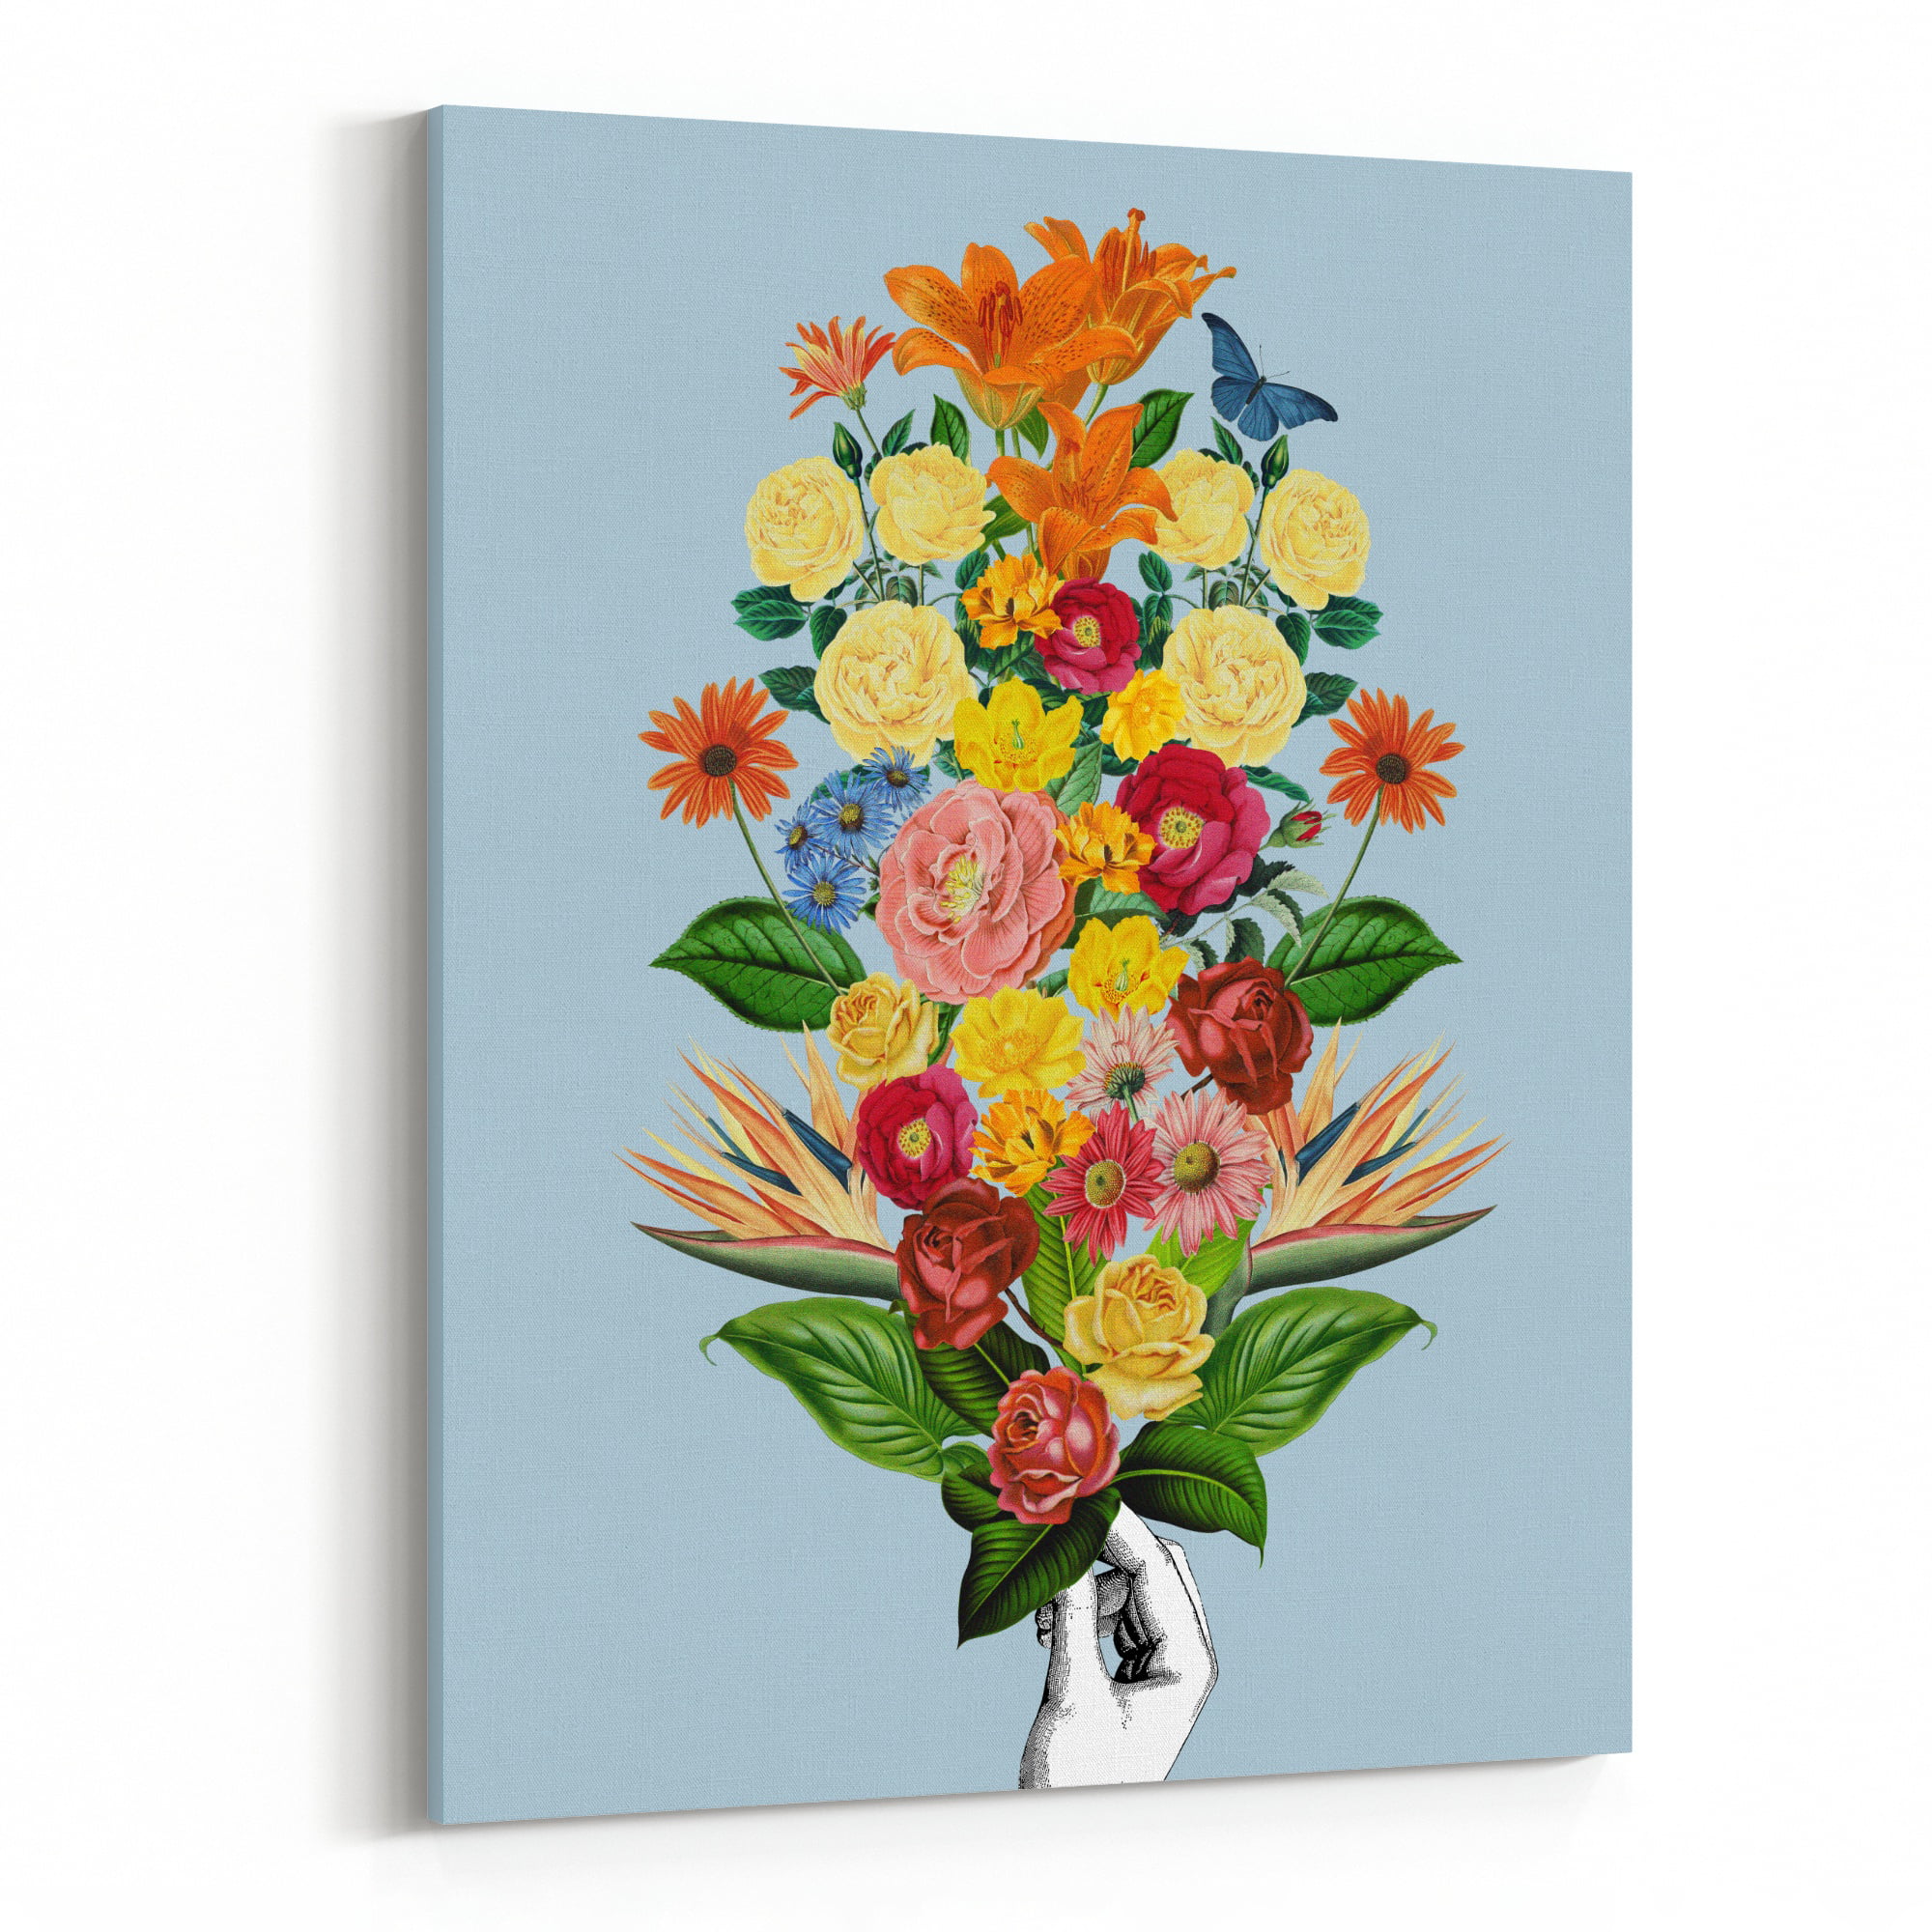 graphic floral illustration Floral Collage 1-8 x 11 inch giclee print bright bouquet Abstract